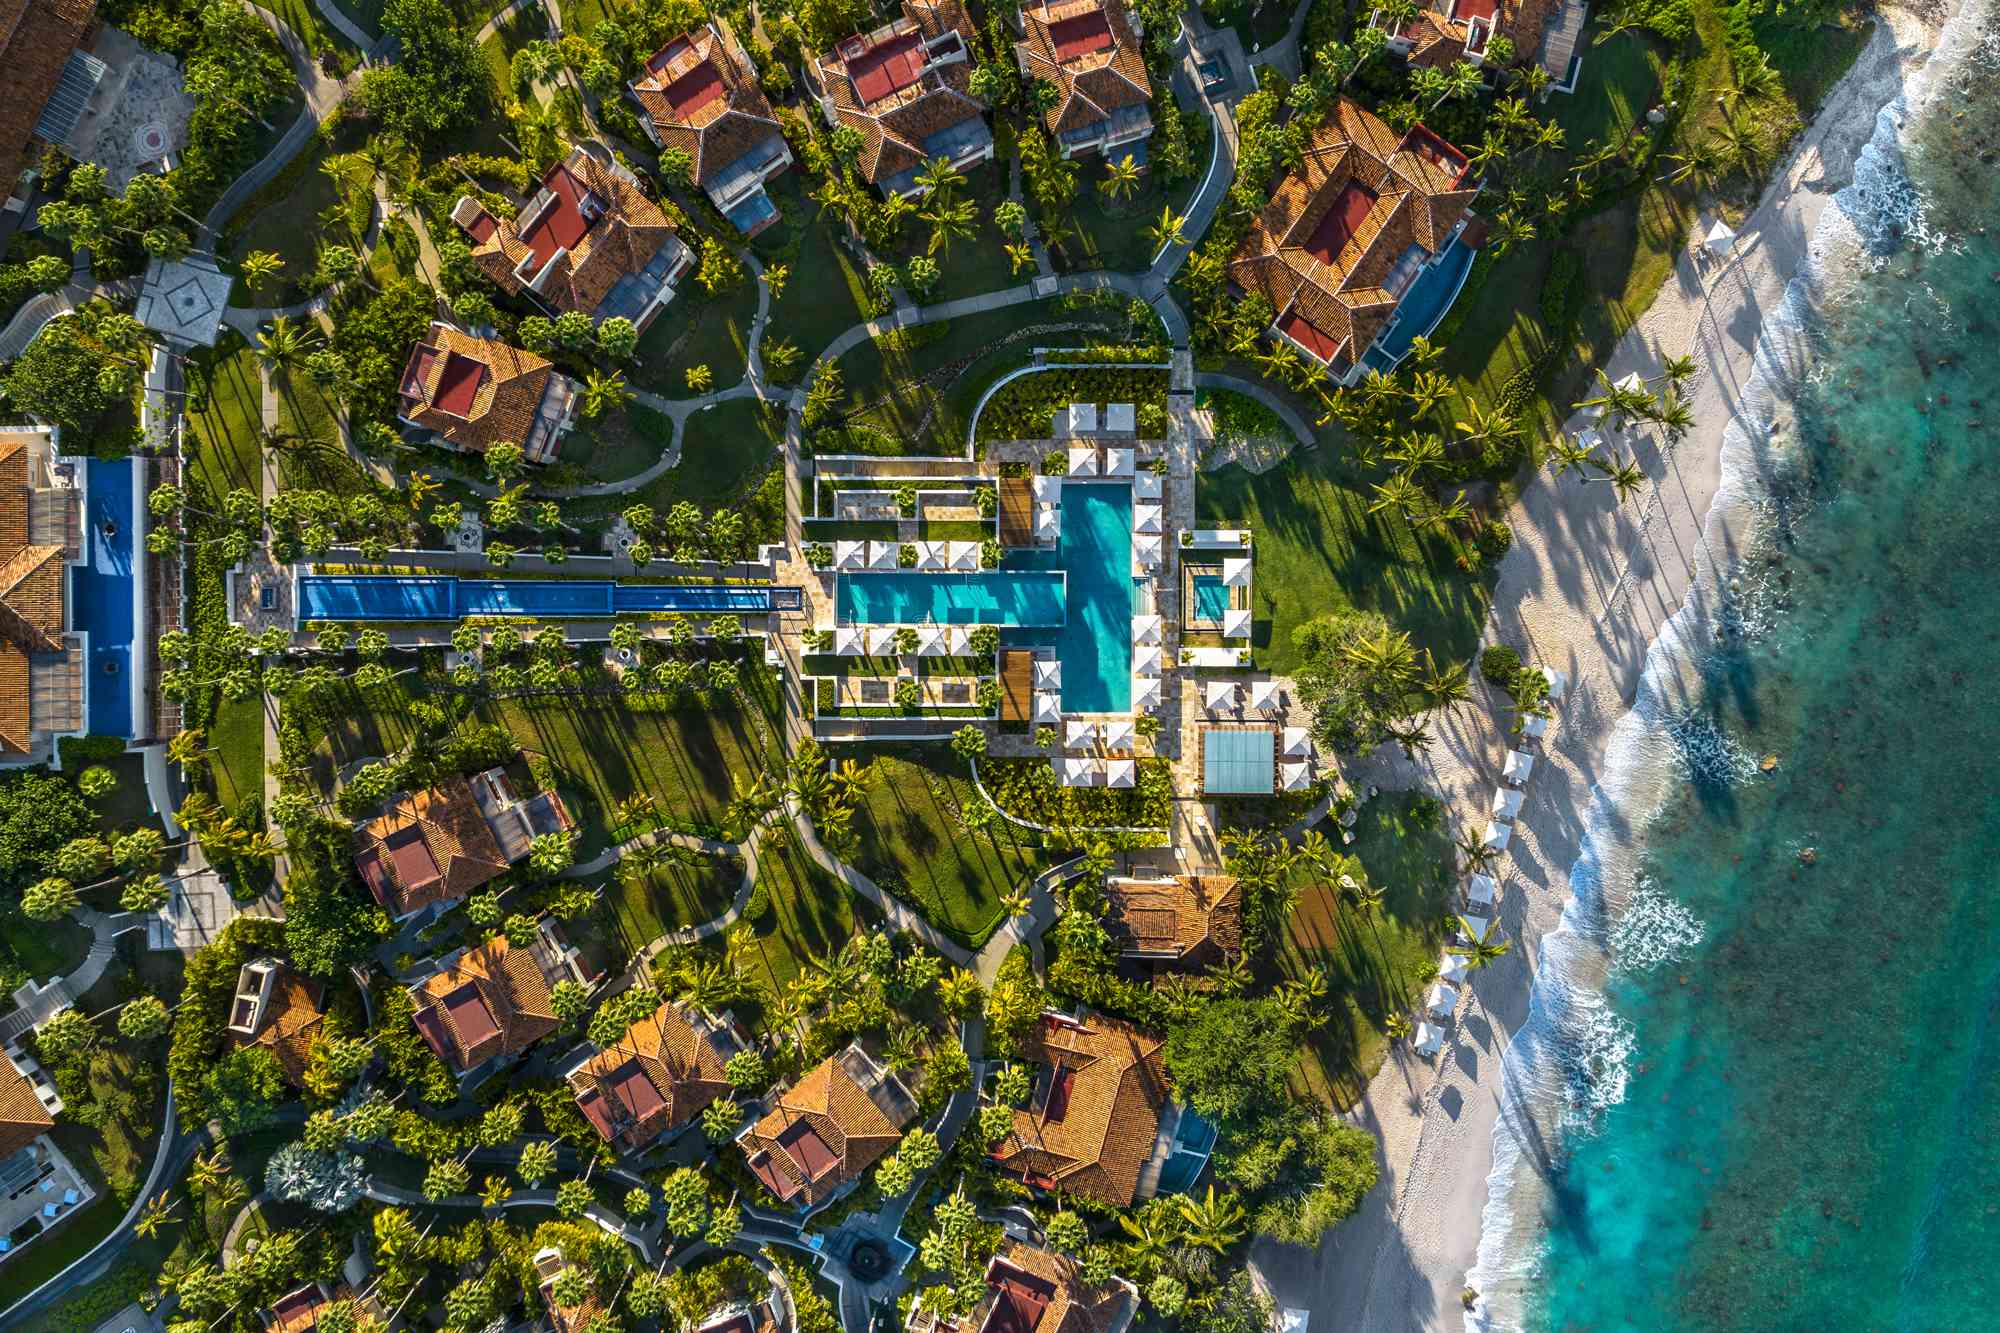 this luxury punta mita resort underwent a $45 million renovation — and now has 3 pools, oceanfront villas, and a mayan sweat lodge